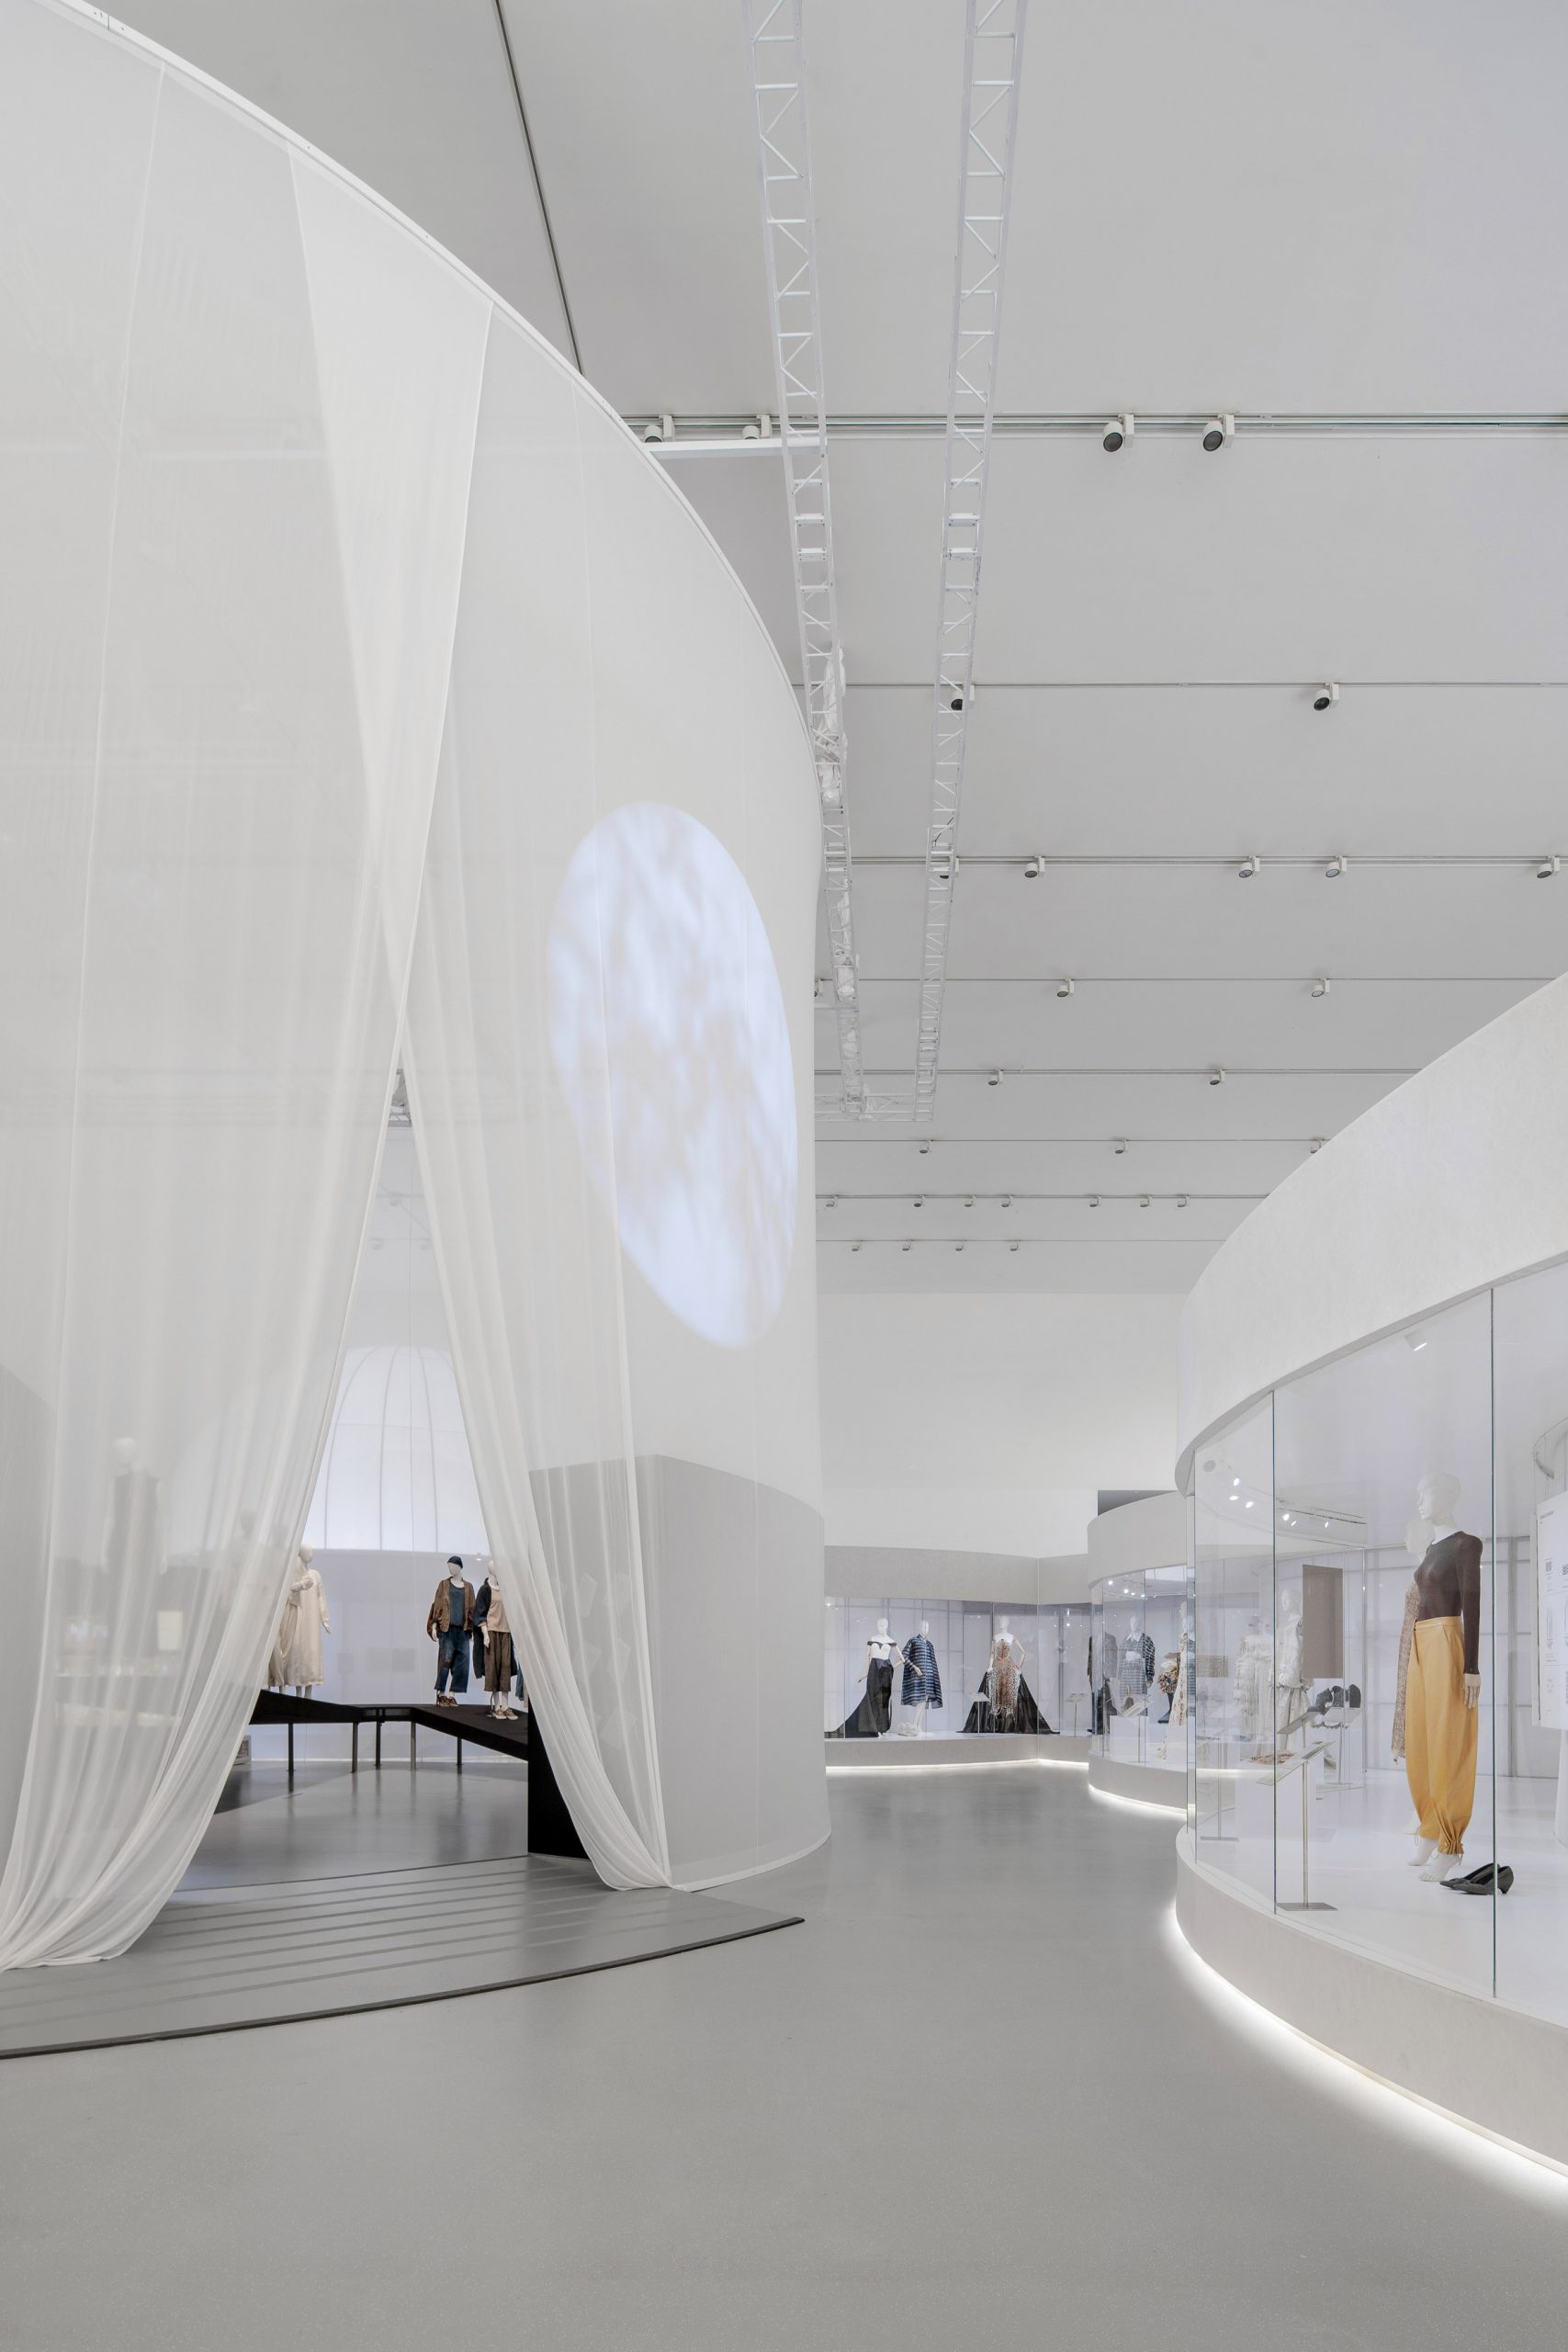 Images are projected onto the translucent fabrics 